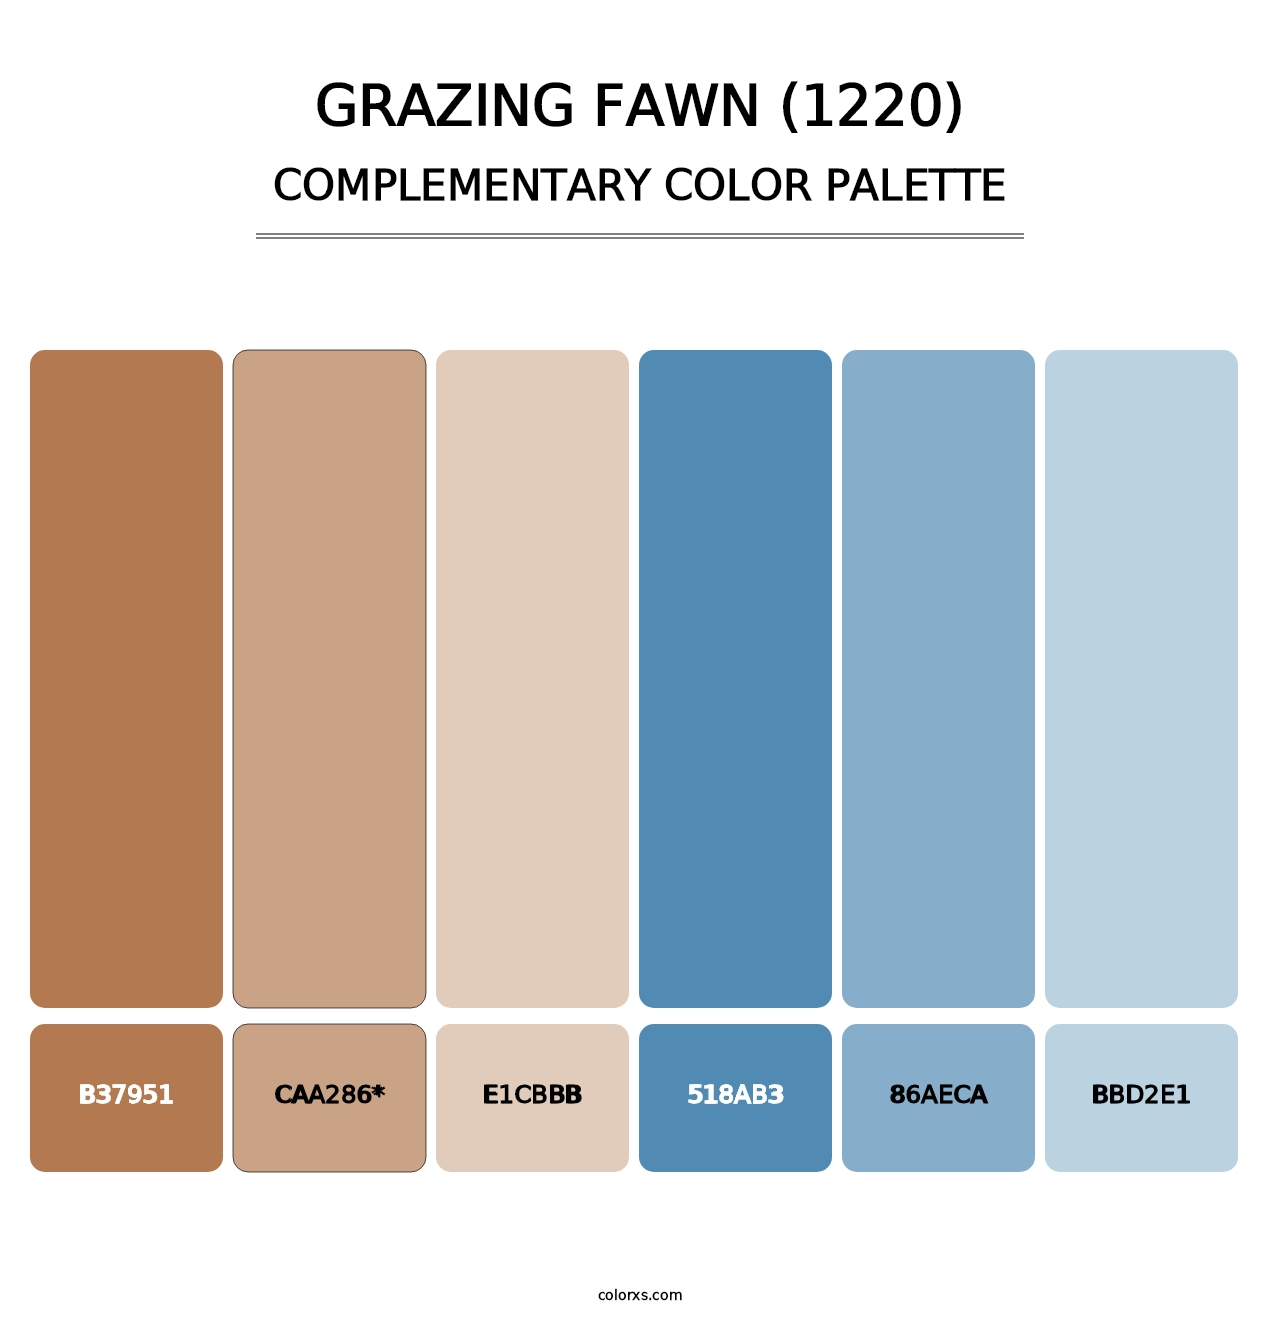 Grazing Fawn (1220) - Complementary Color Palette